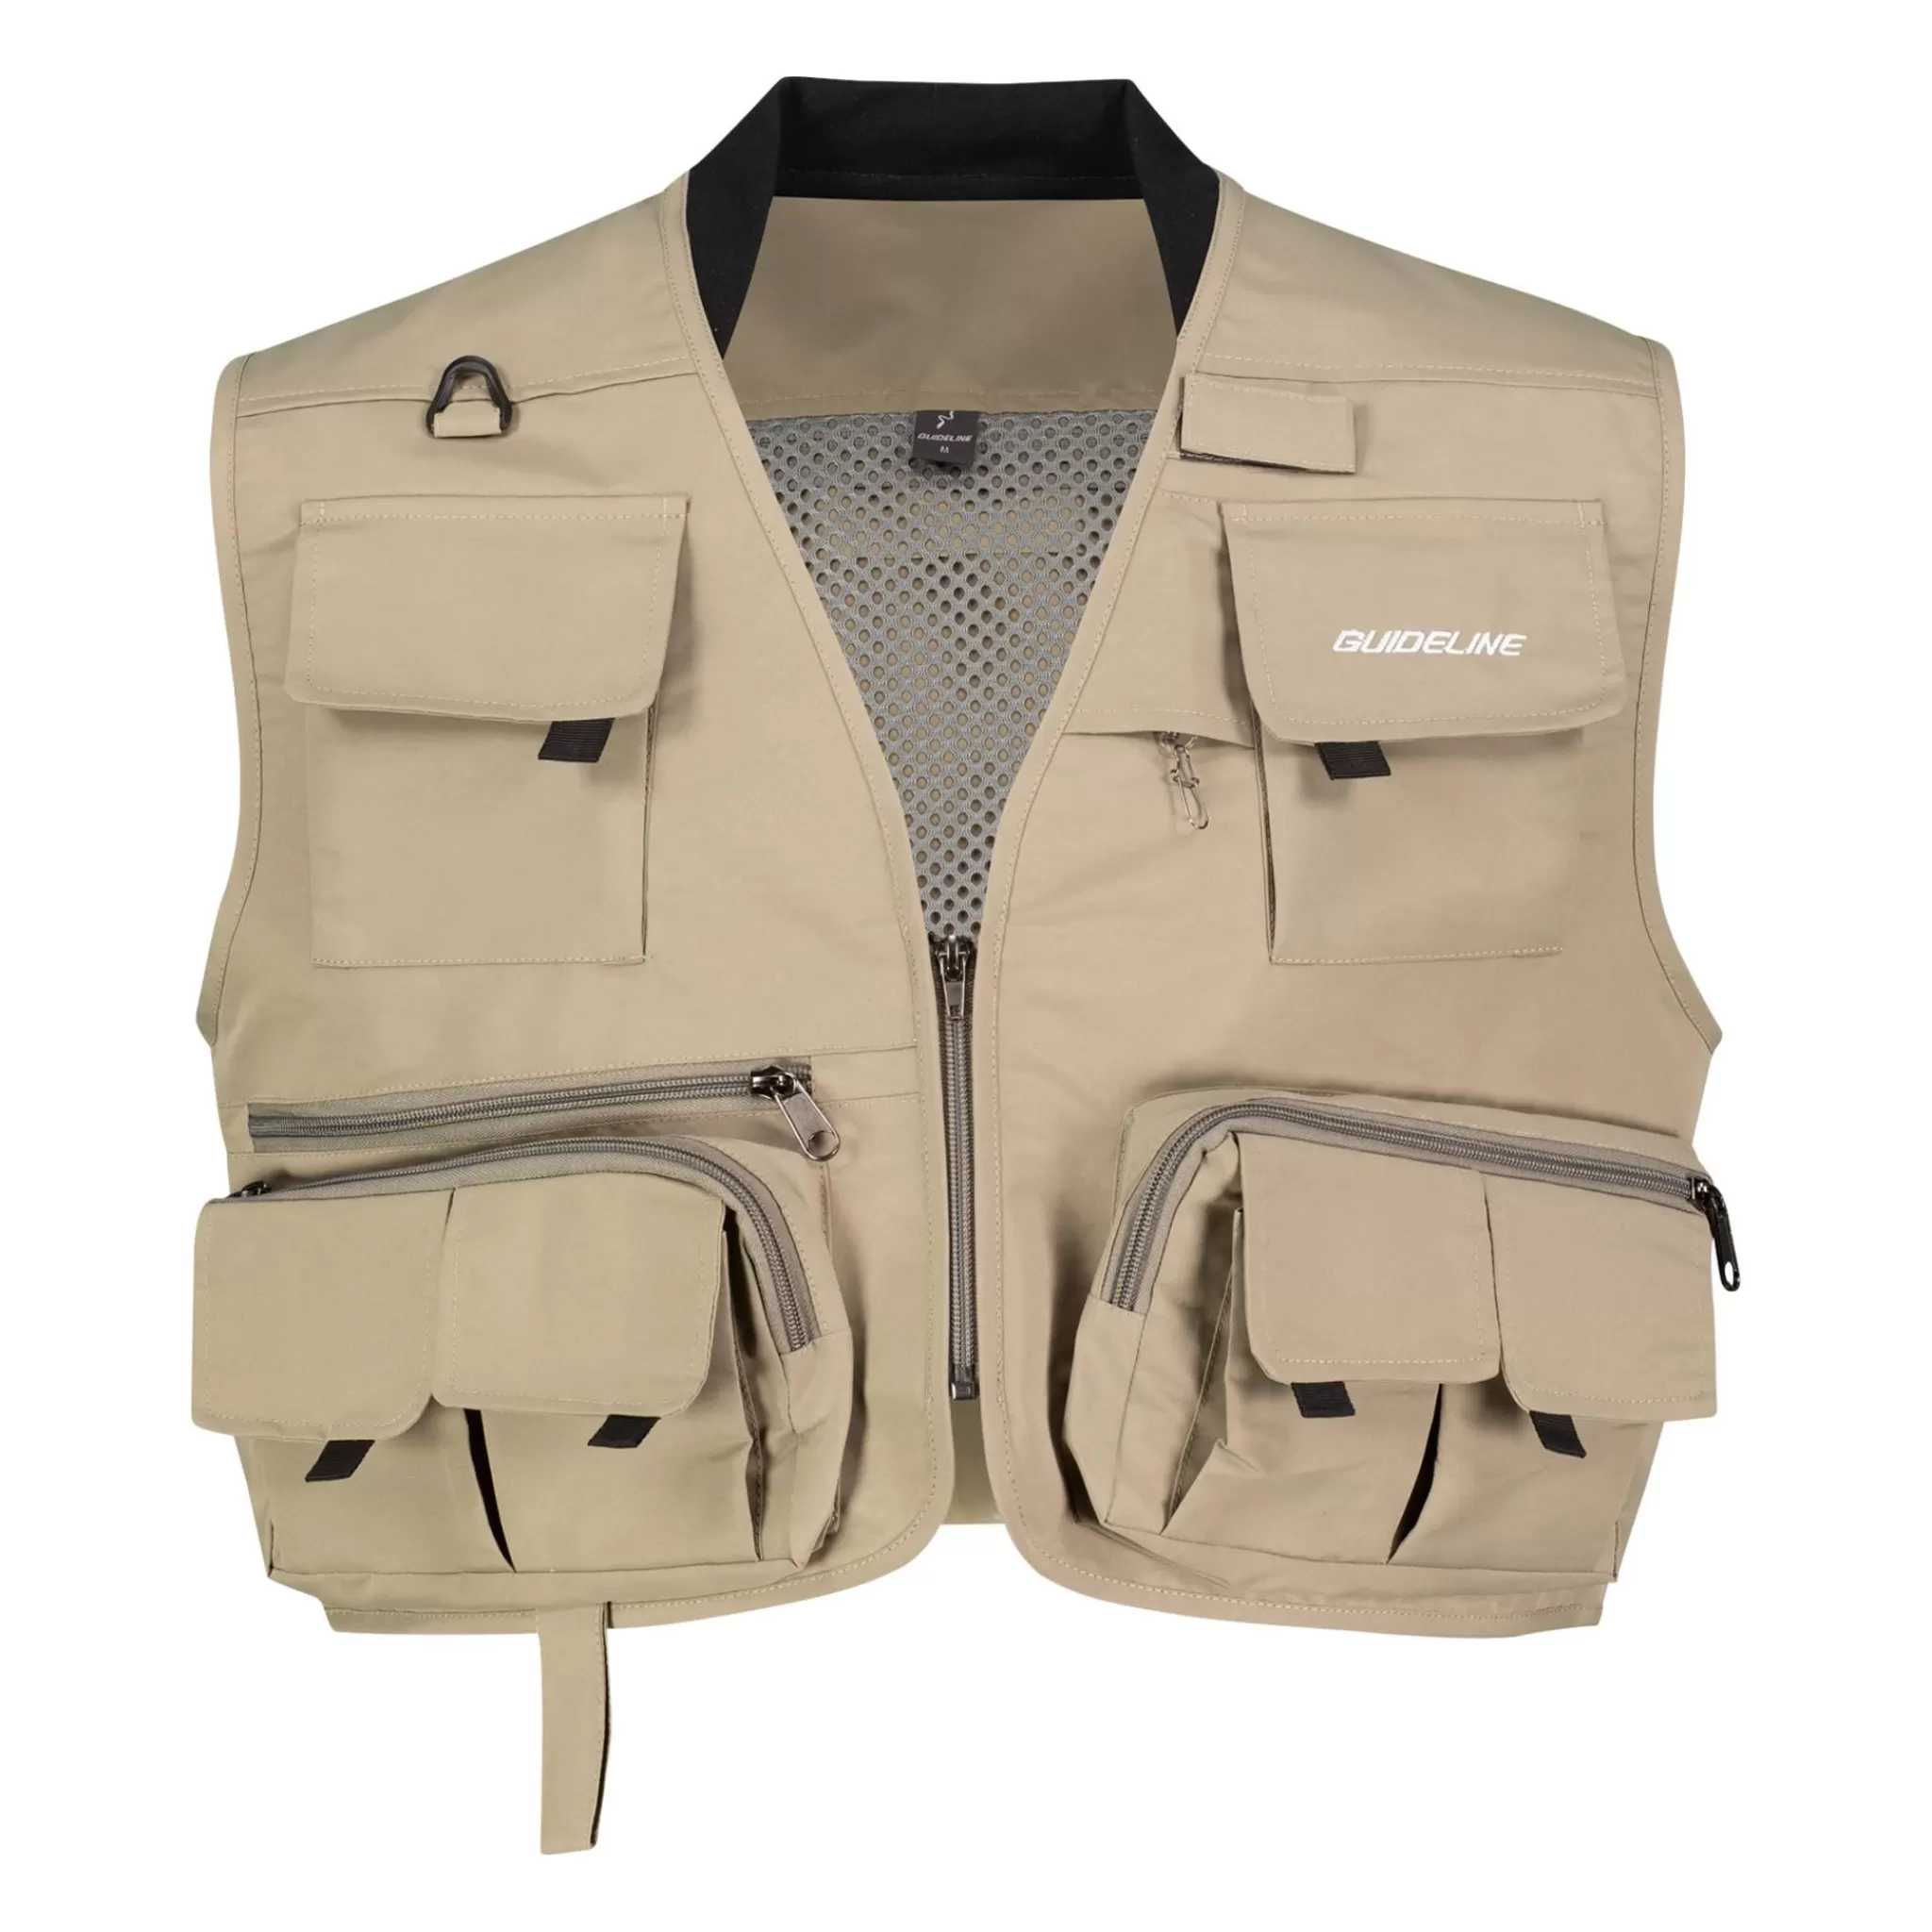 Store guideline Inwater Fly Vest, Fiskevest